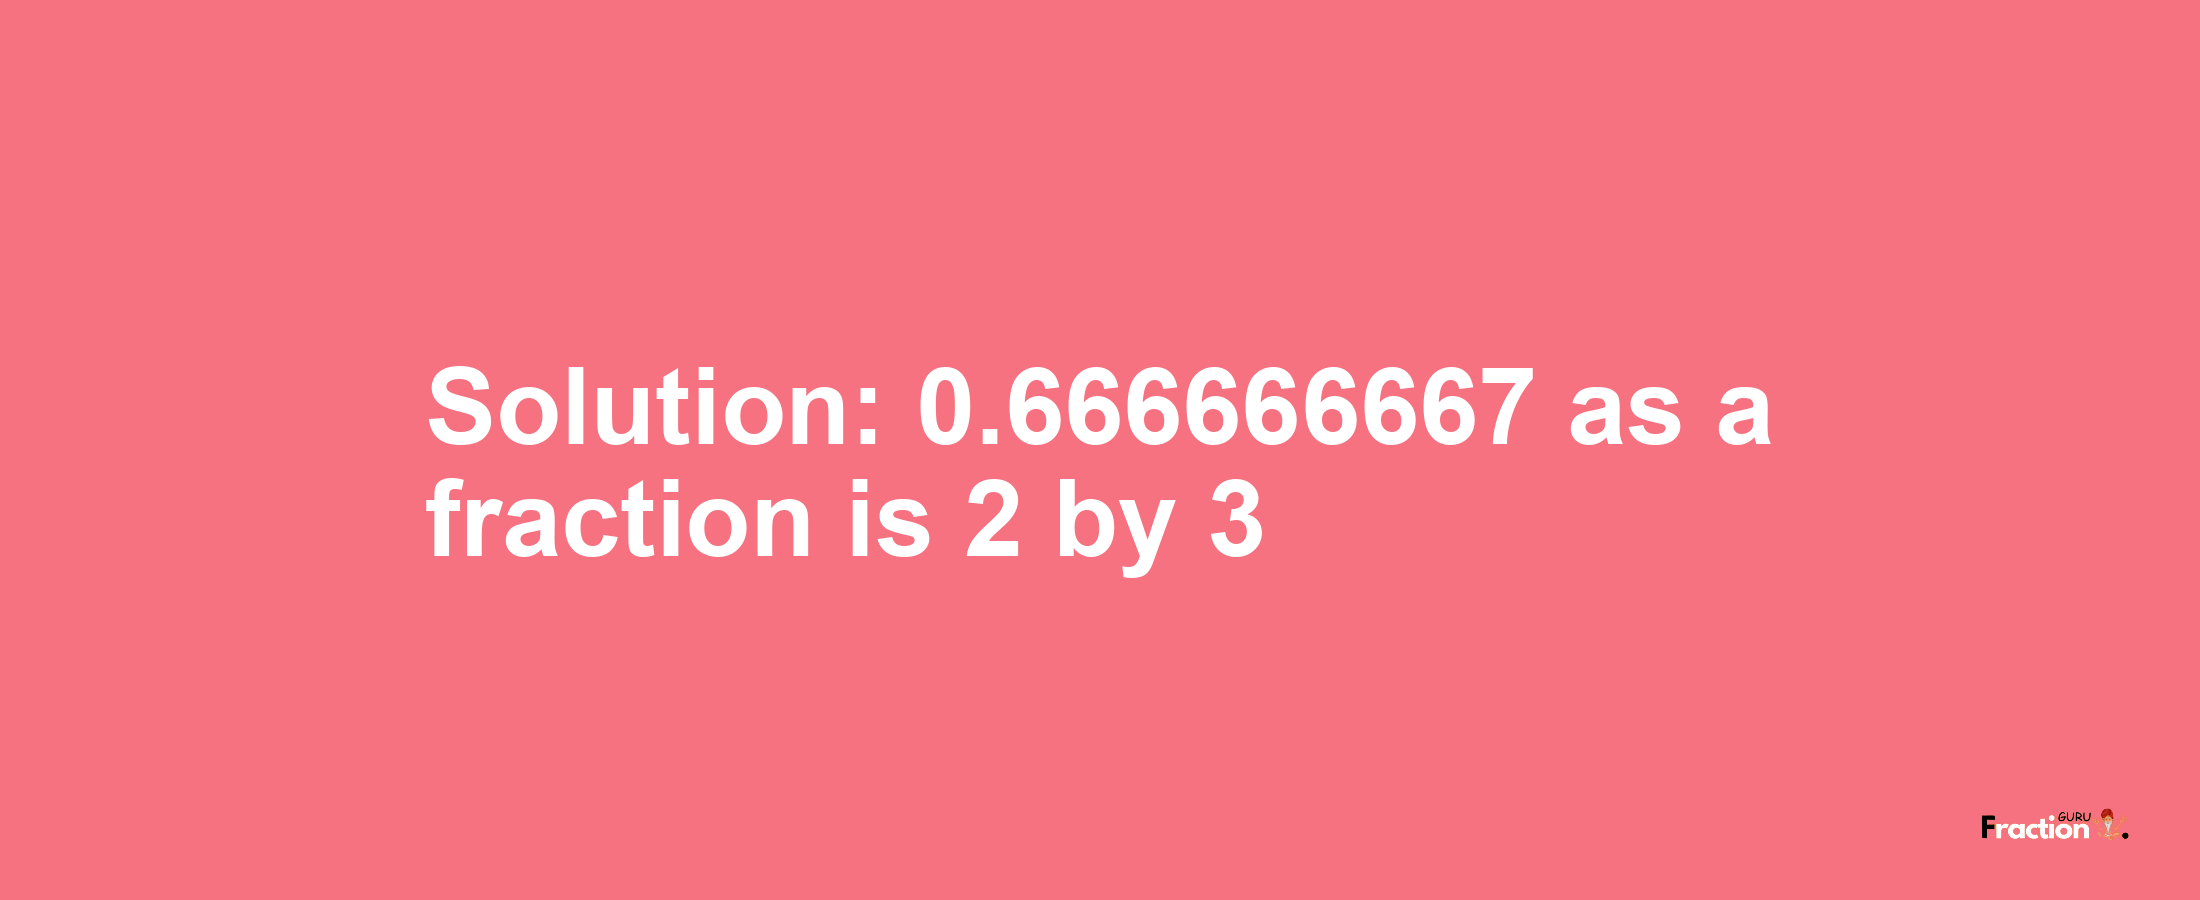 Solution:0.666666667 as a fraction is 2/3